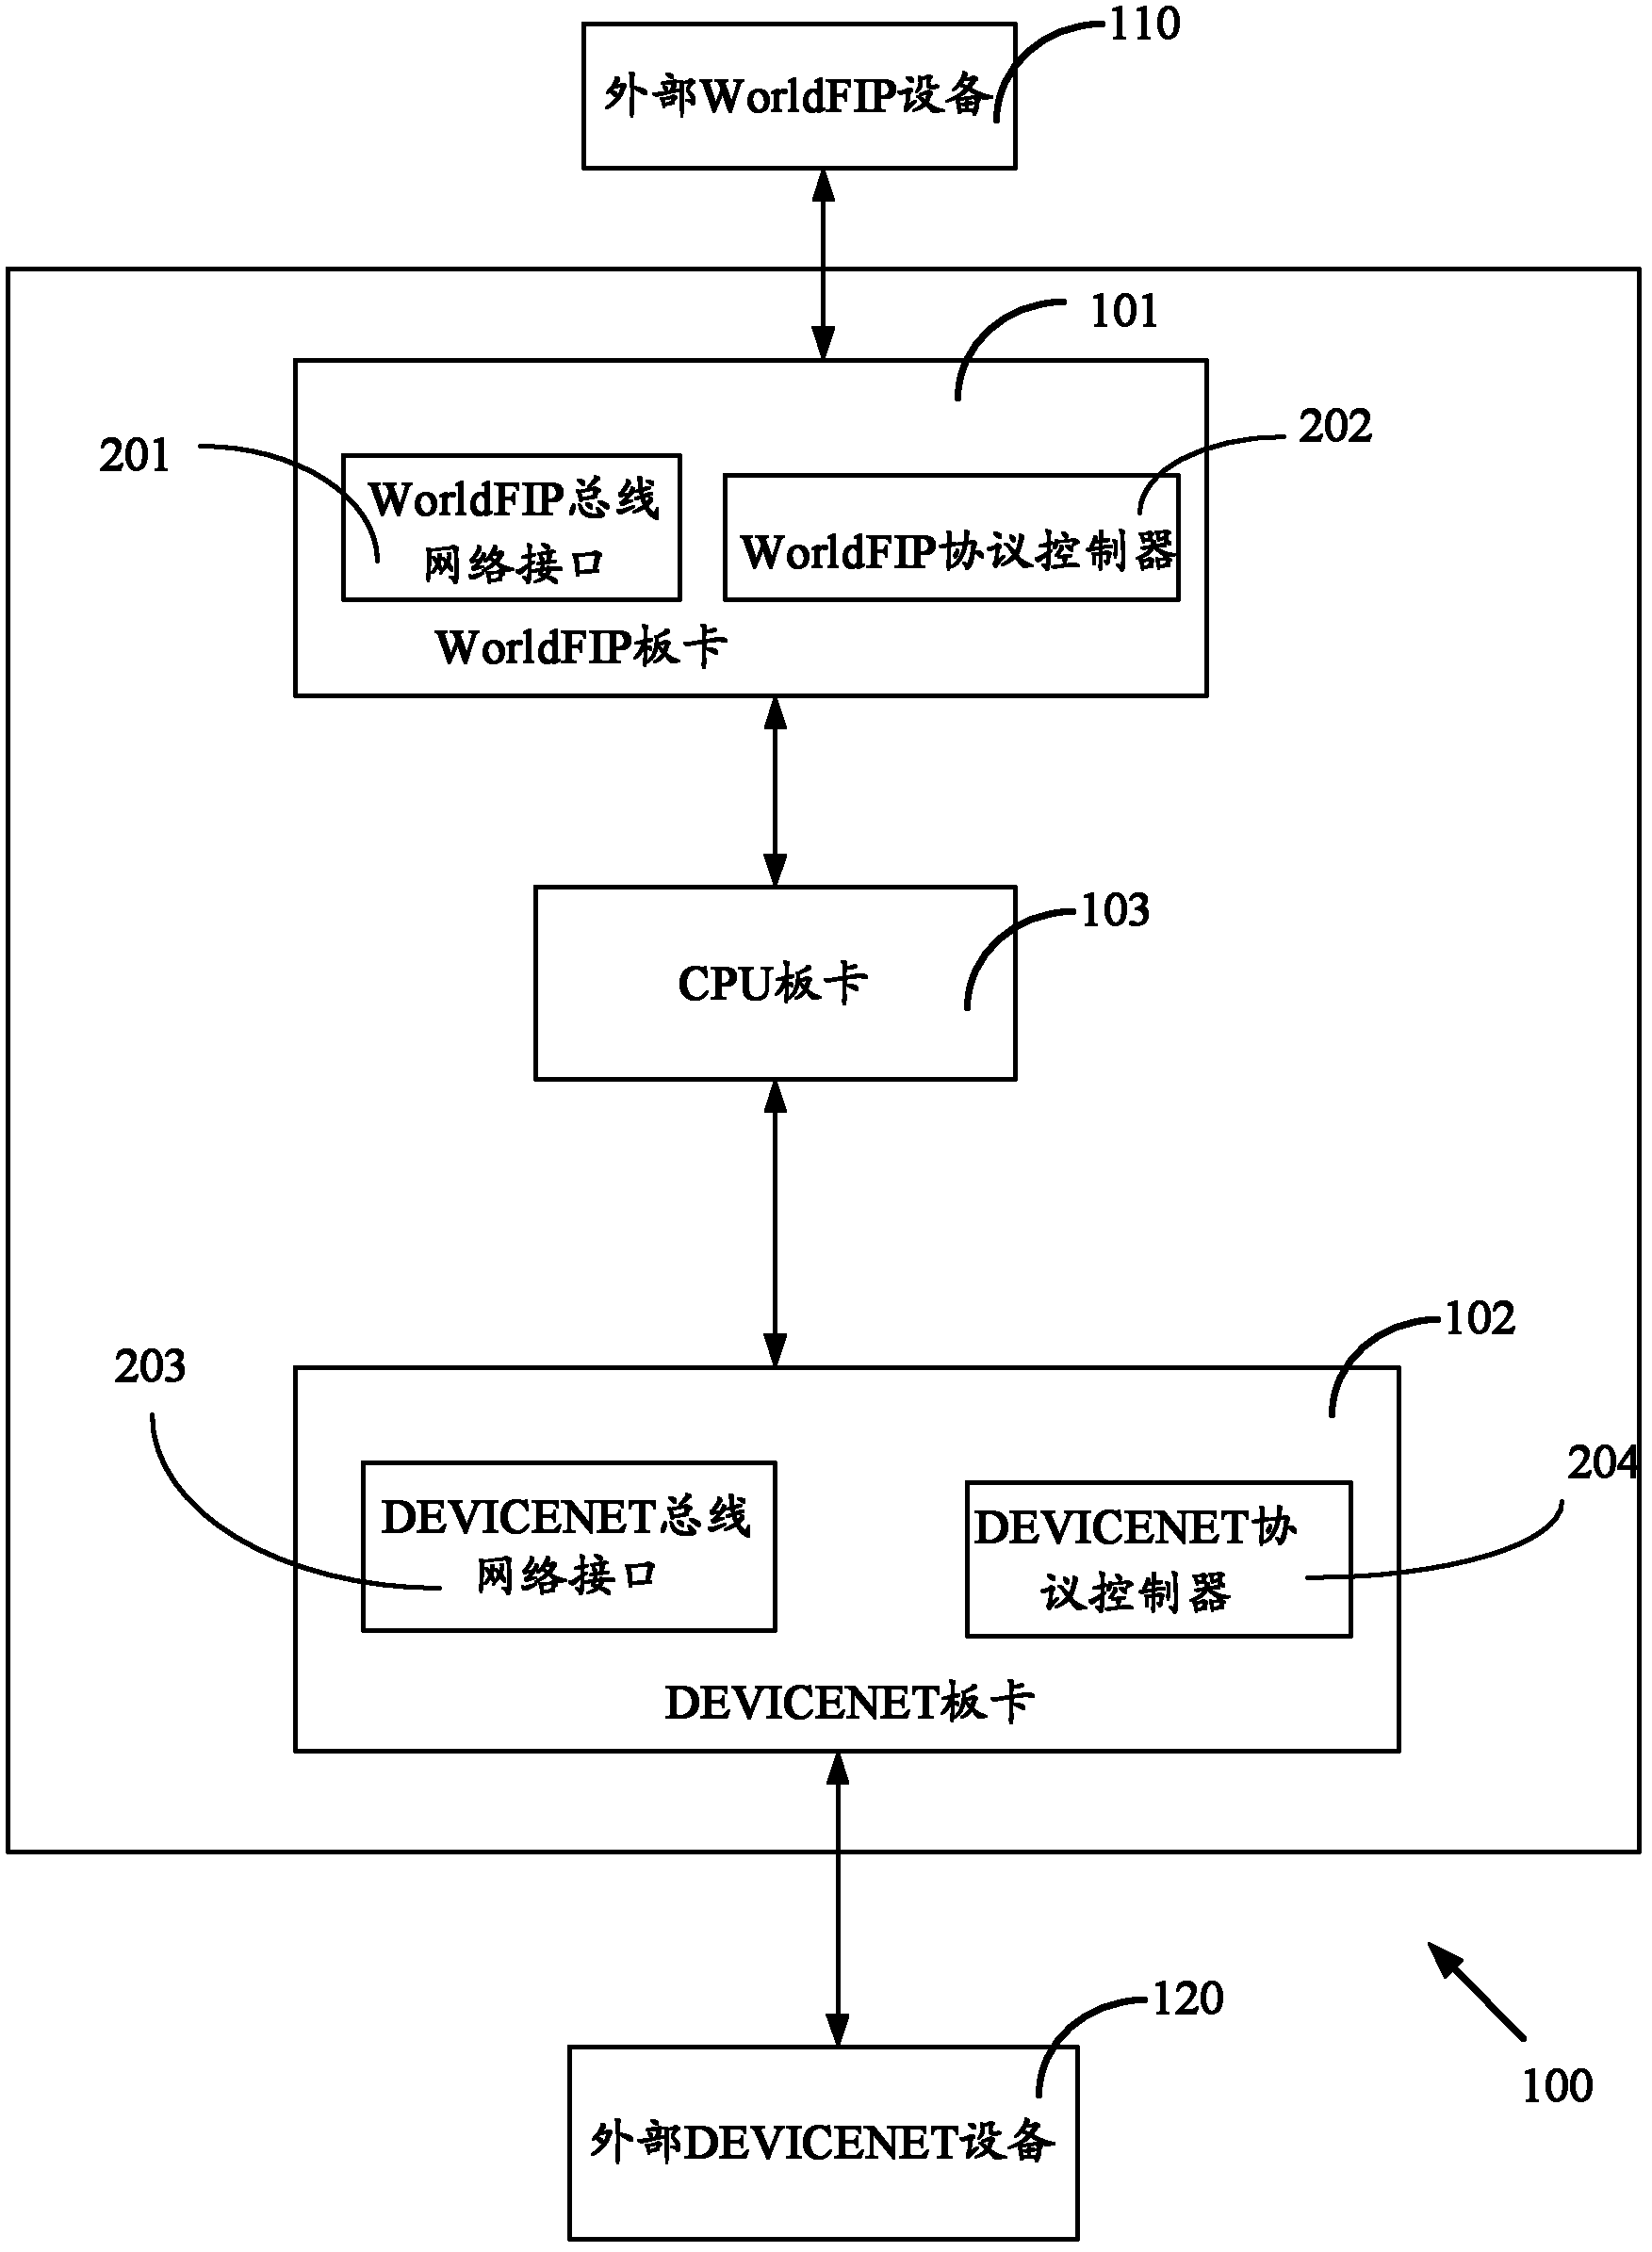 Communication device and method for rail transit vehicles